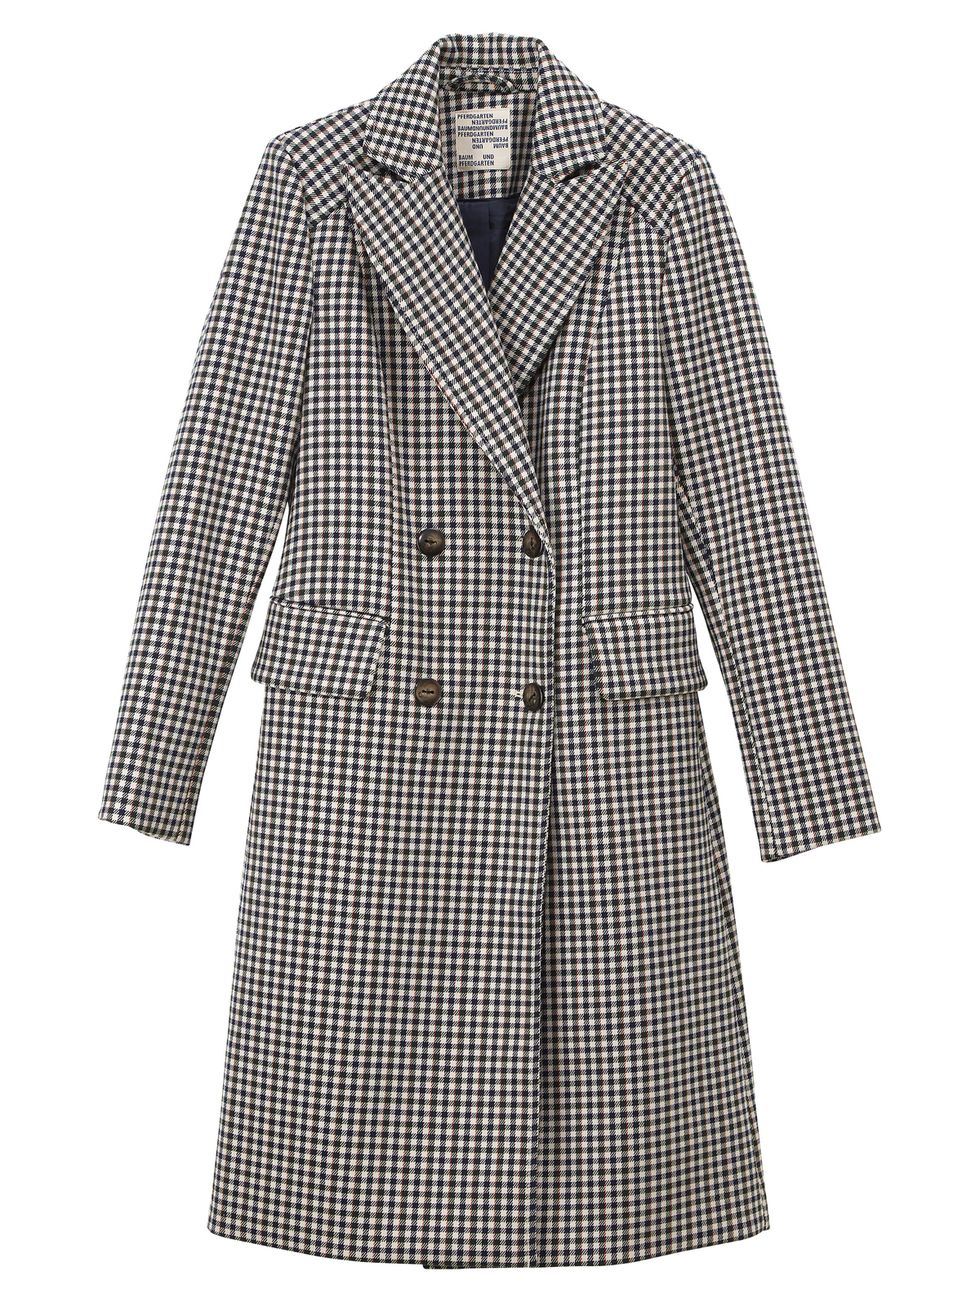 Clothing, Coat, Outerwear, Overcoat, Trench coat, Sleeve, Robe, Collar, Day dress, Duster, 